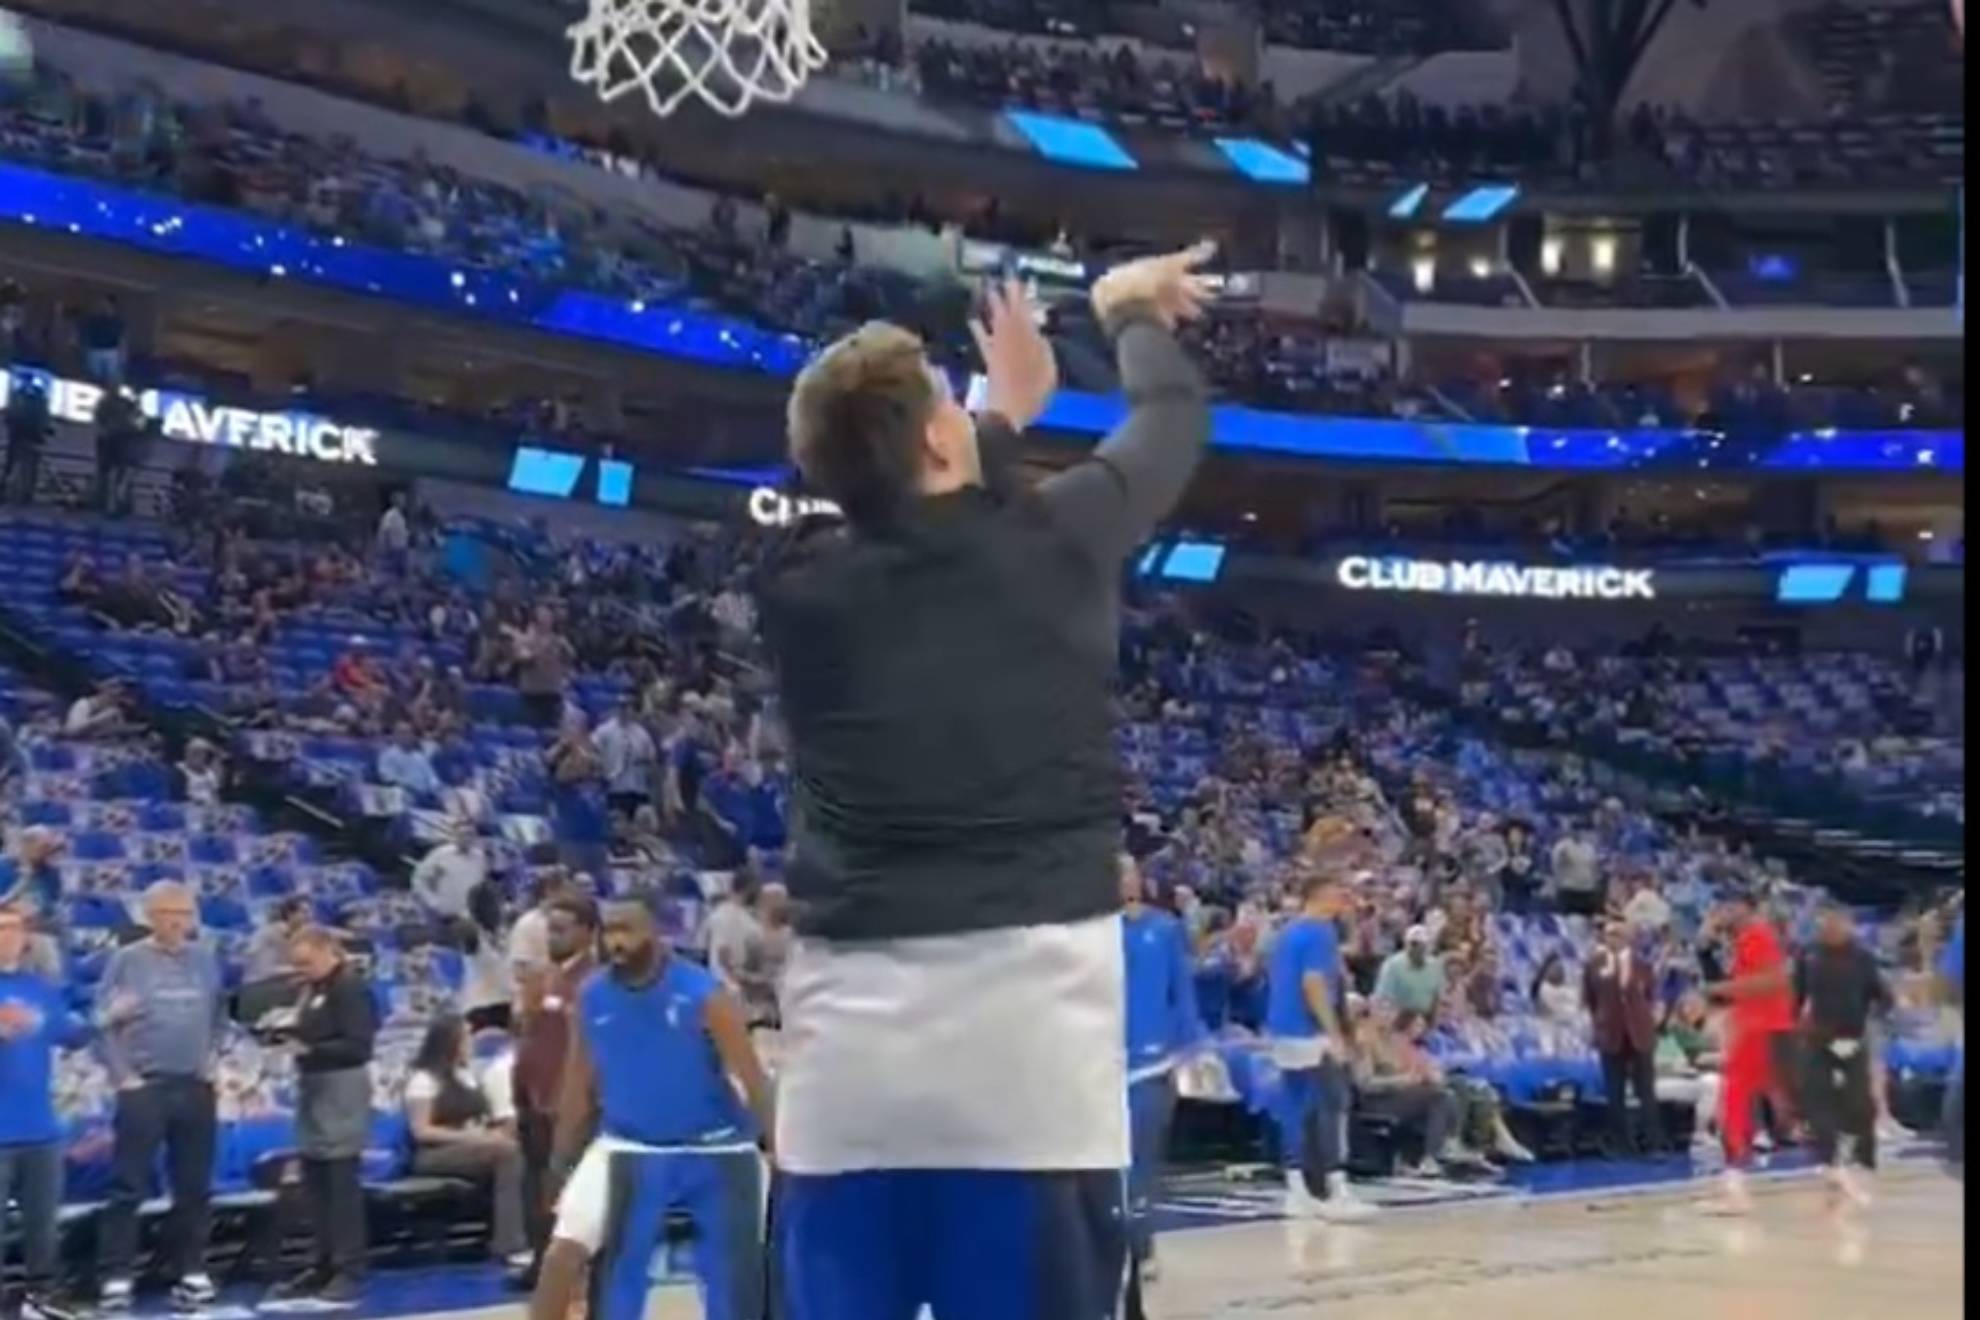 Doncic continues to amaze: the Dallas Mavericks star shows off his incredible skill again